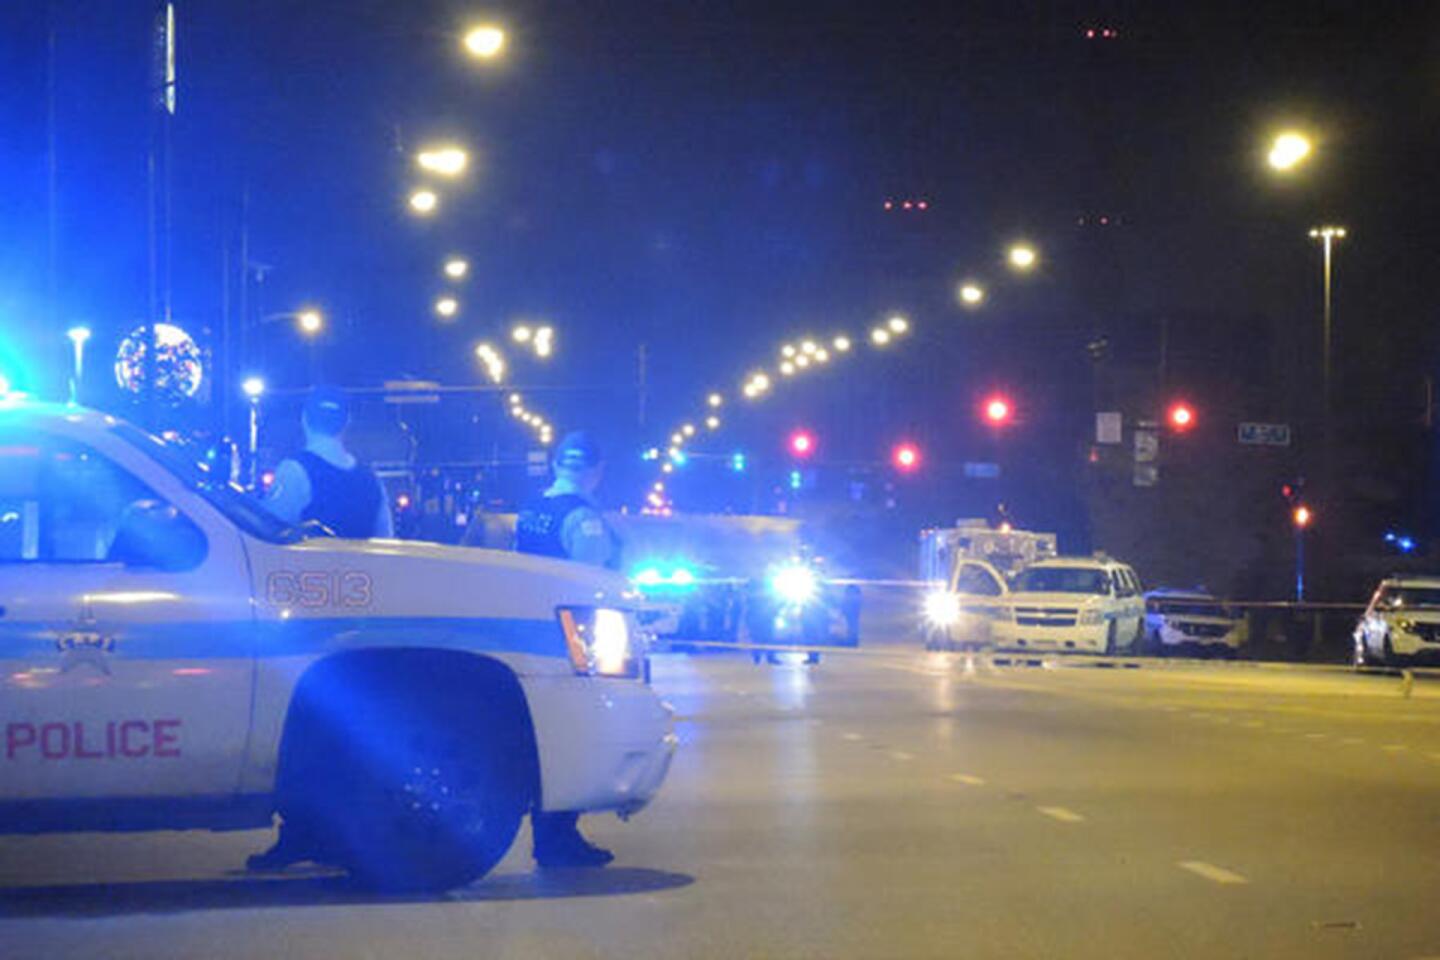 Police redirect traffic near the 4100 block of South Pulaski Road where Laquan McDonald was fatally shot by Chicago police in October 2014.